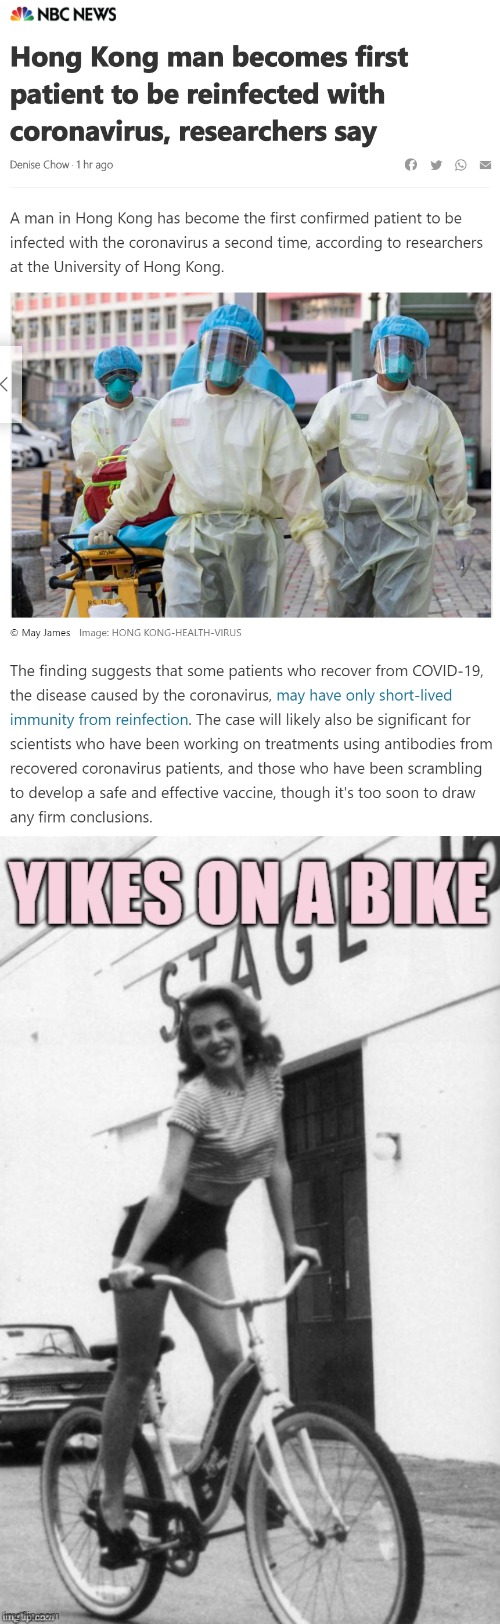 yikes on a bike folks maybe we should take this thing seriously | image tagged in kylie yikes on a bike,covid-19,coronavirus,pandemic,infection,corona virus | made w/ Imgflip meme maker